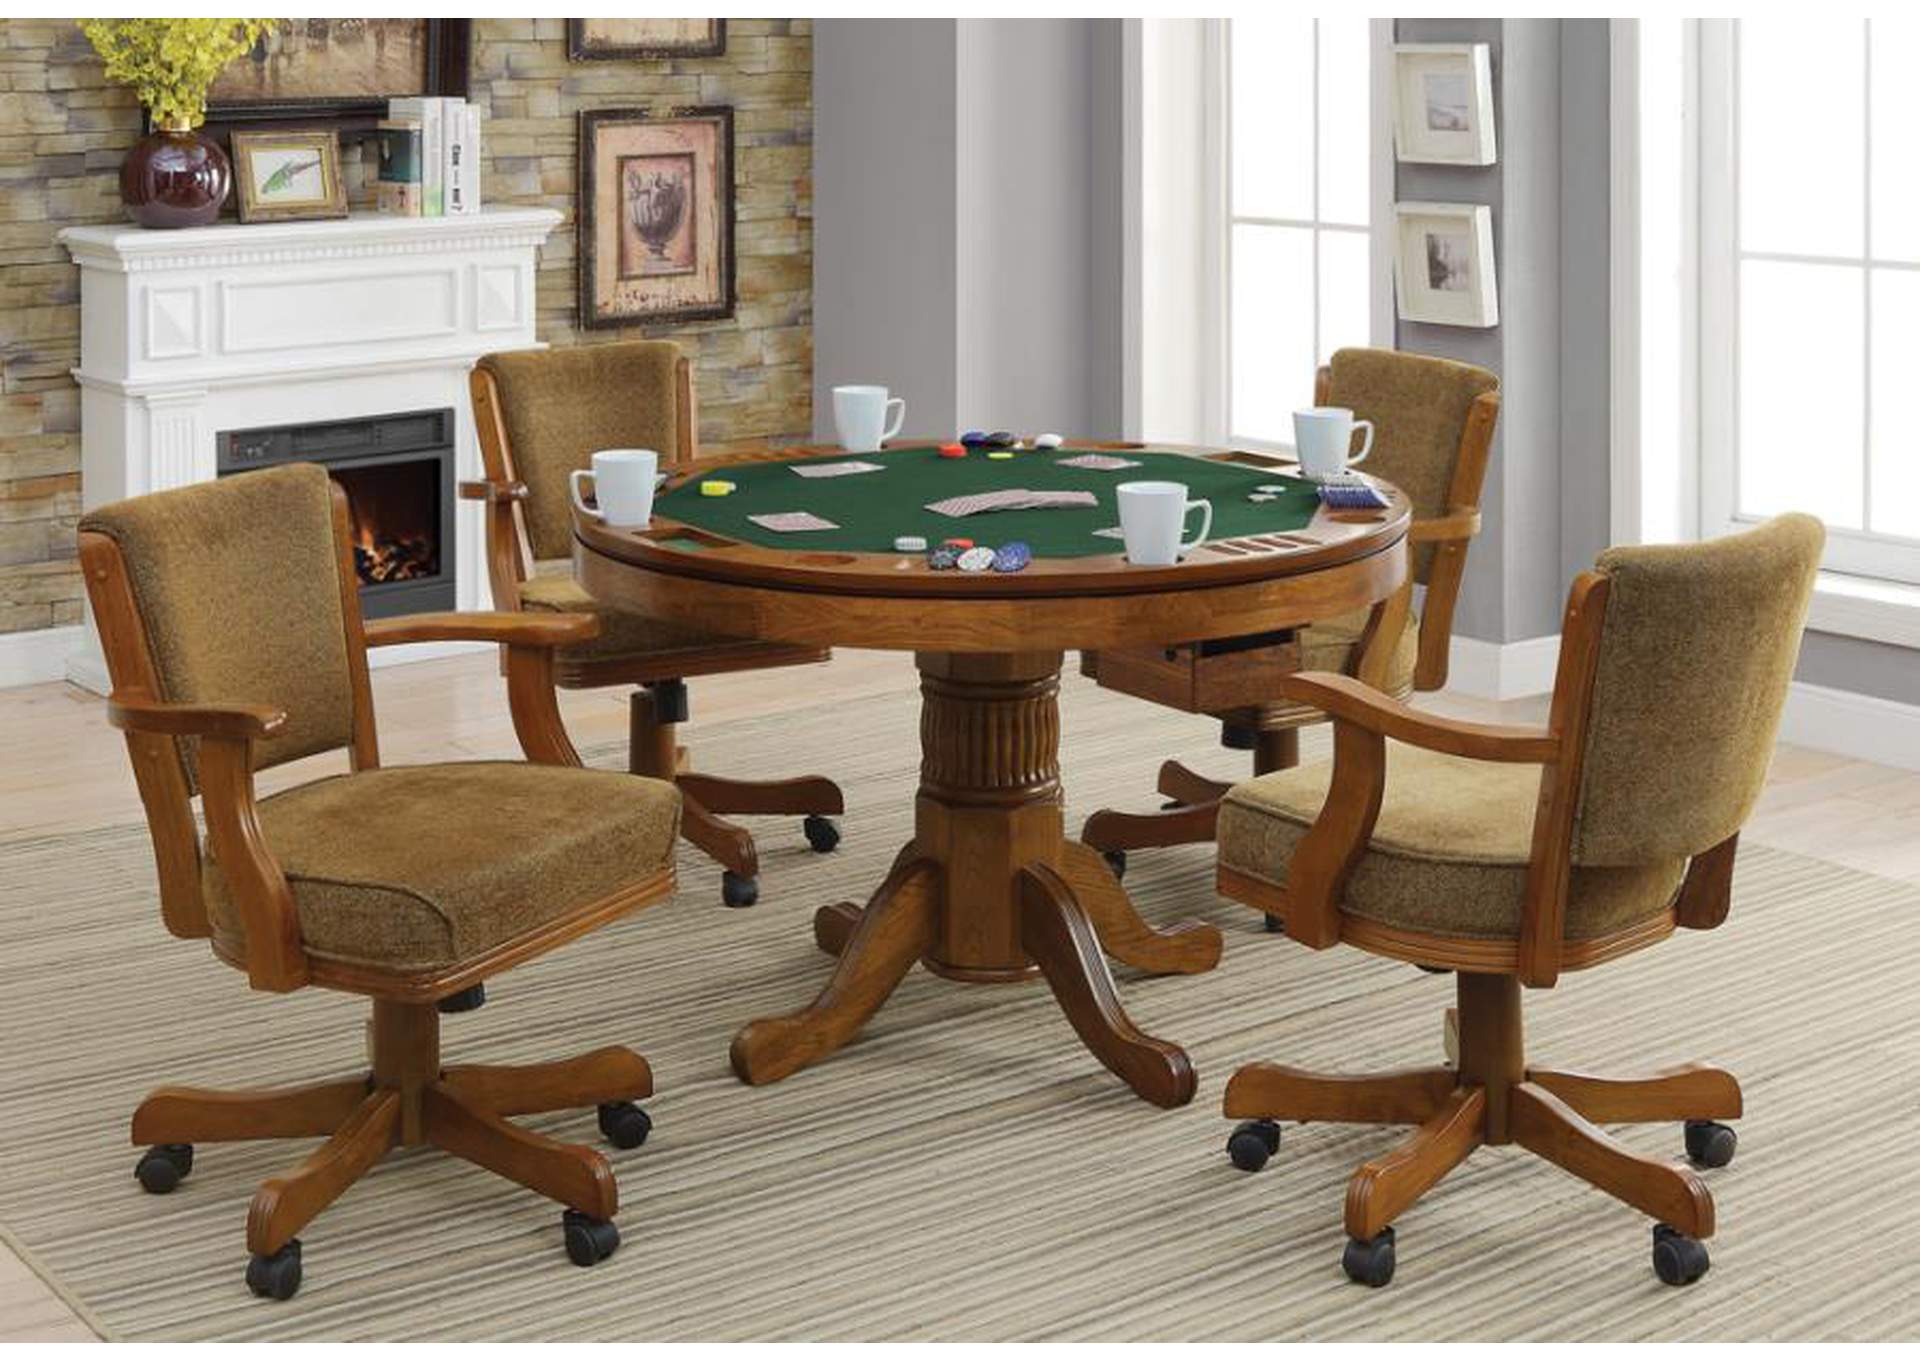 Mitchell 3-in-1 Game Table Amber,Coaster Furniture